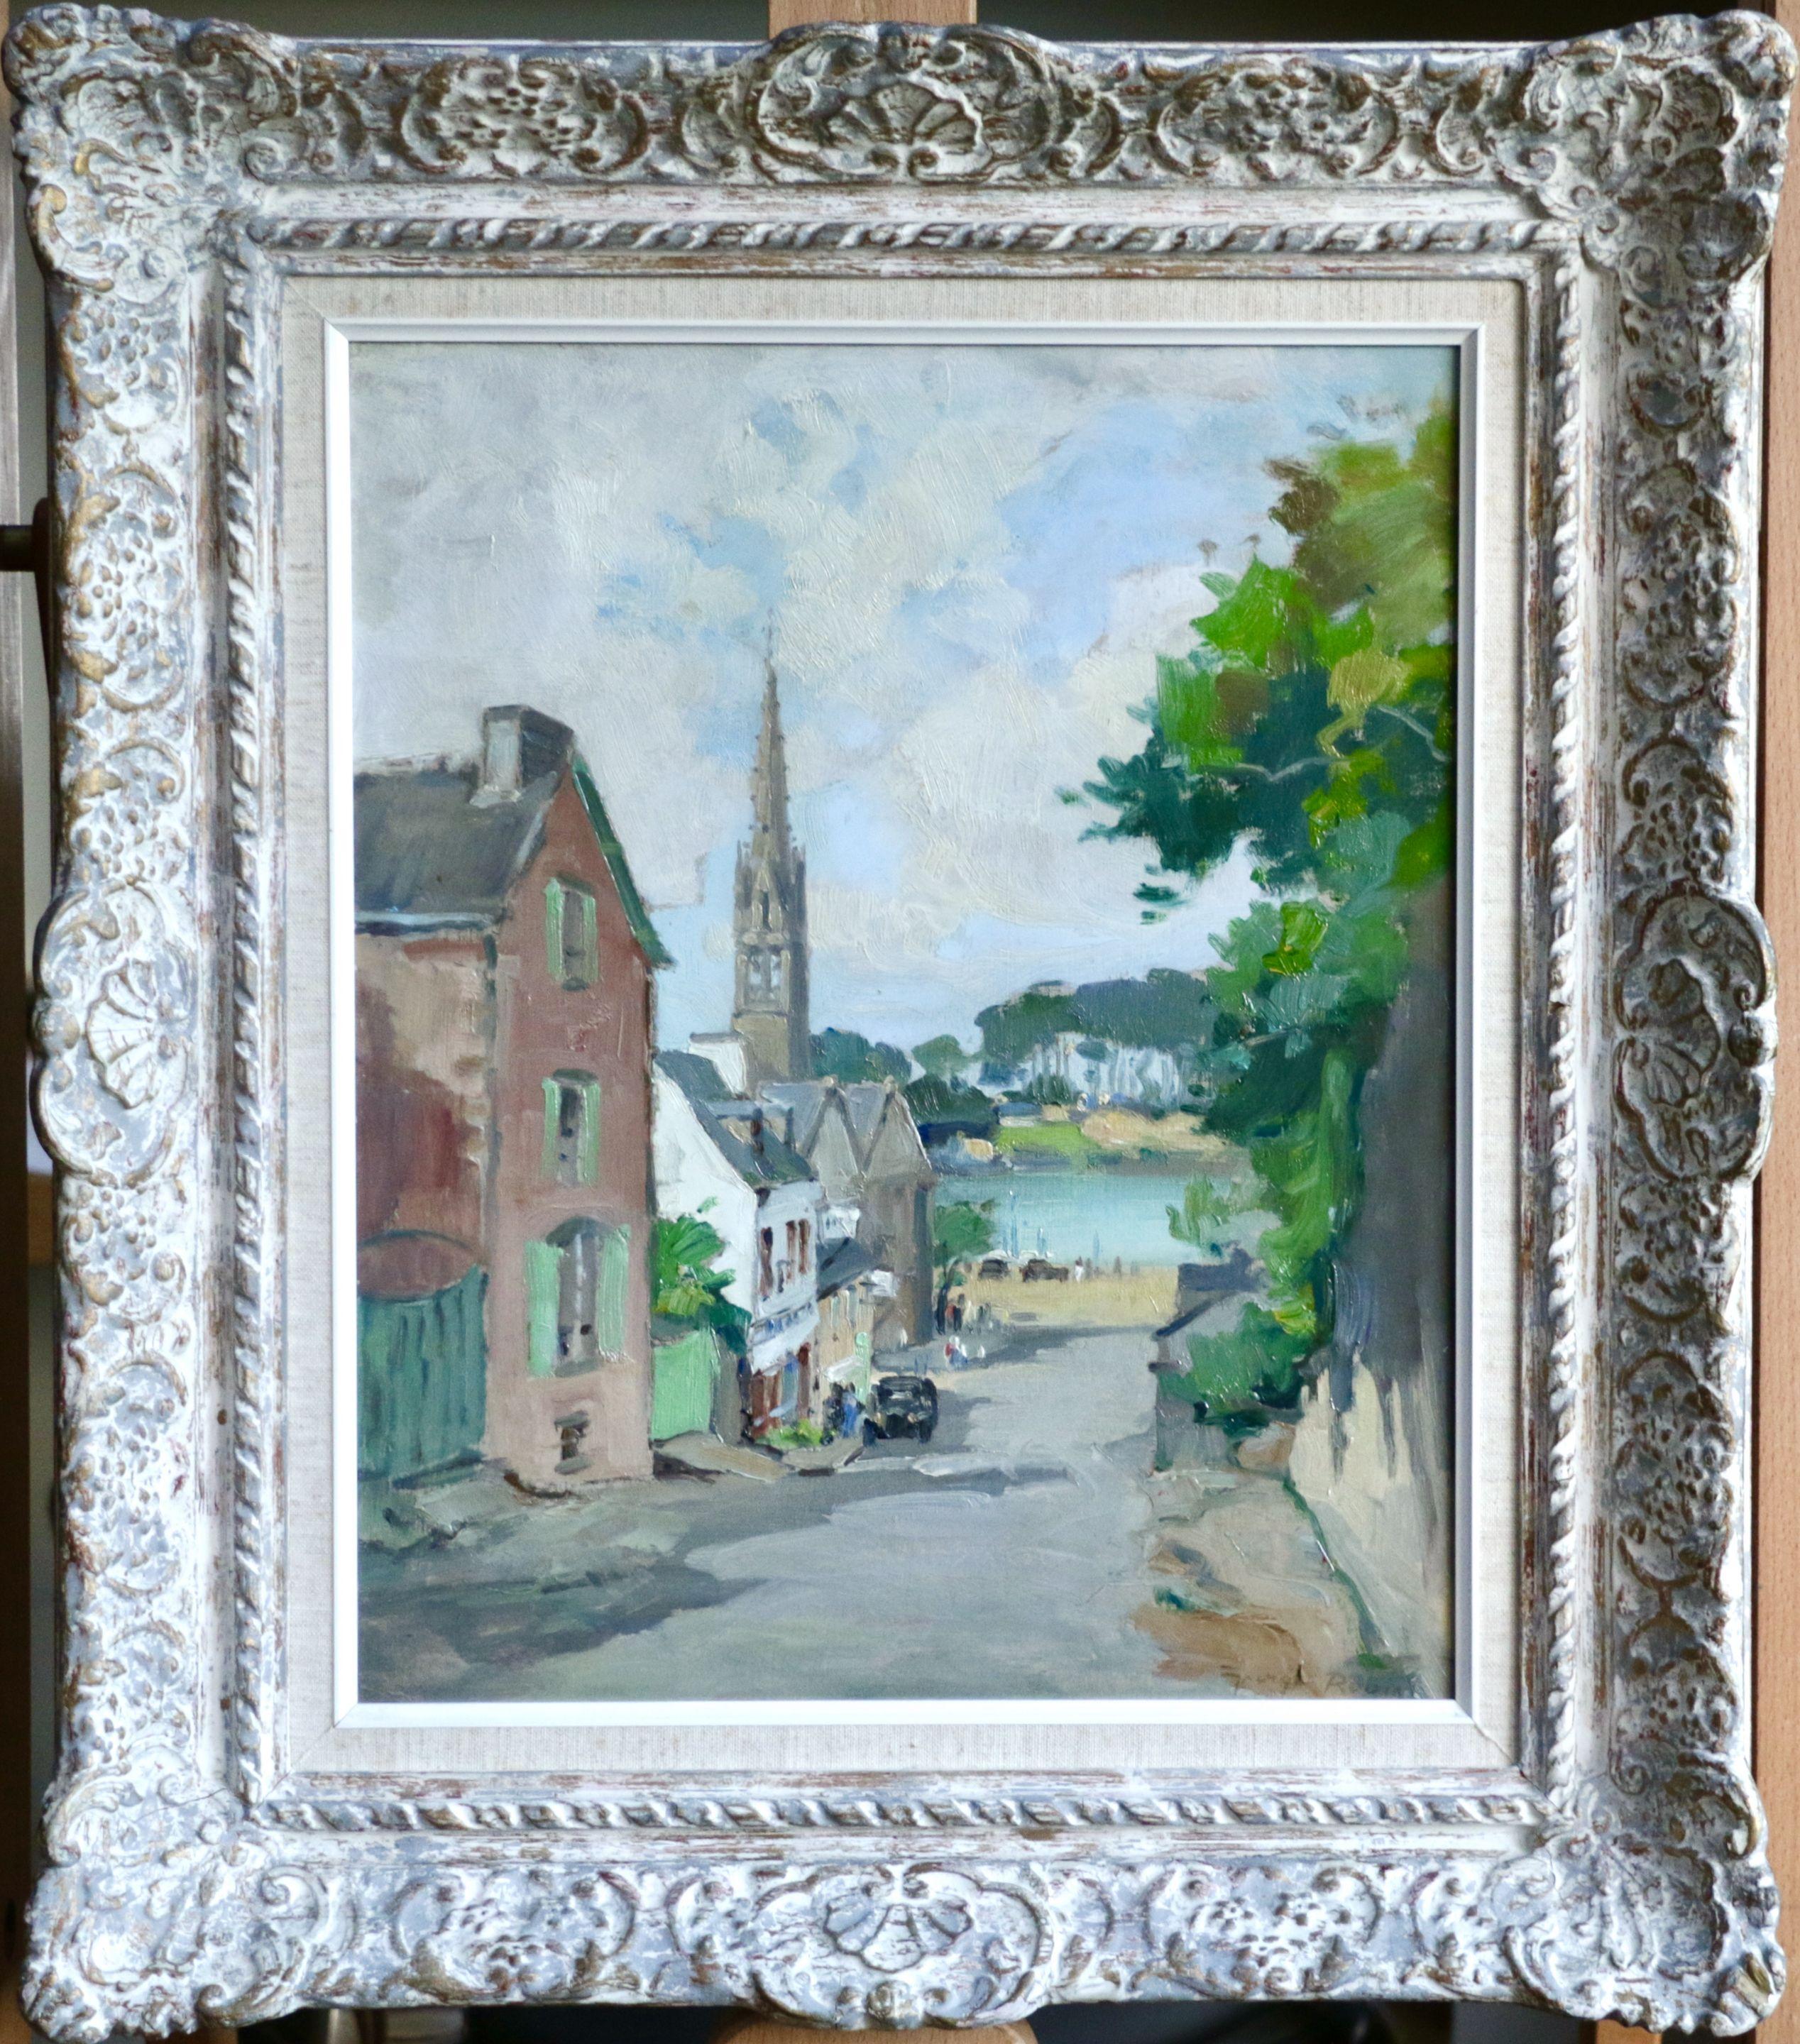 Oil on panel. Signed lower right. Framed dimensions are 23 inches high by 20 inches wide.

Born in Paris in 1903, Georges Charles Robin was a student of Paul Michel Dupuy at École des Beaux-Arts, achieving success in his early career as a stage